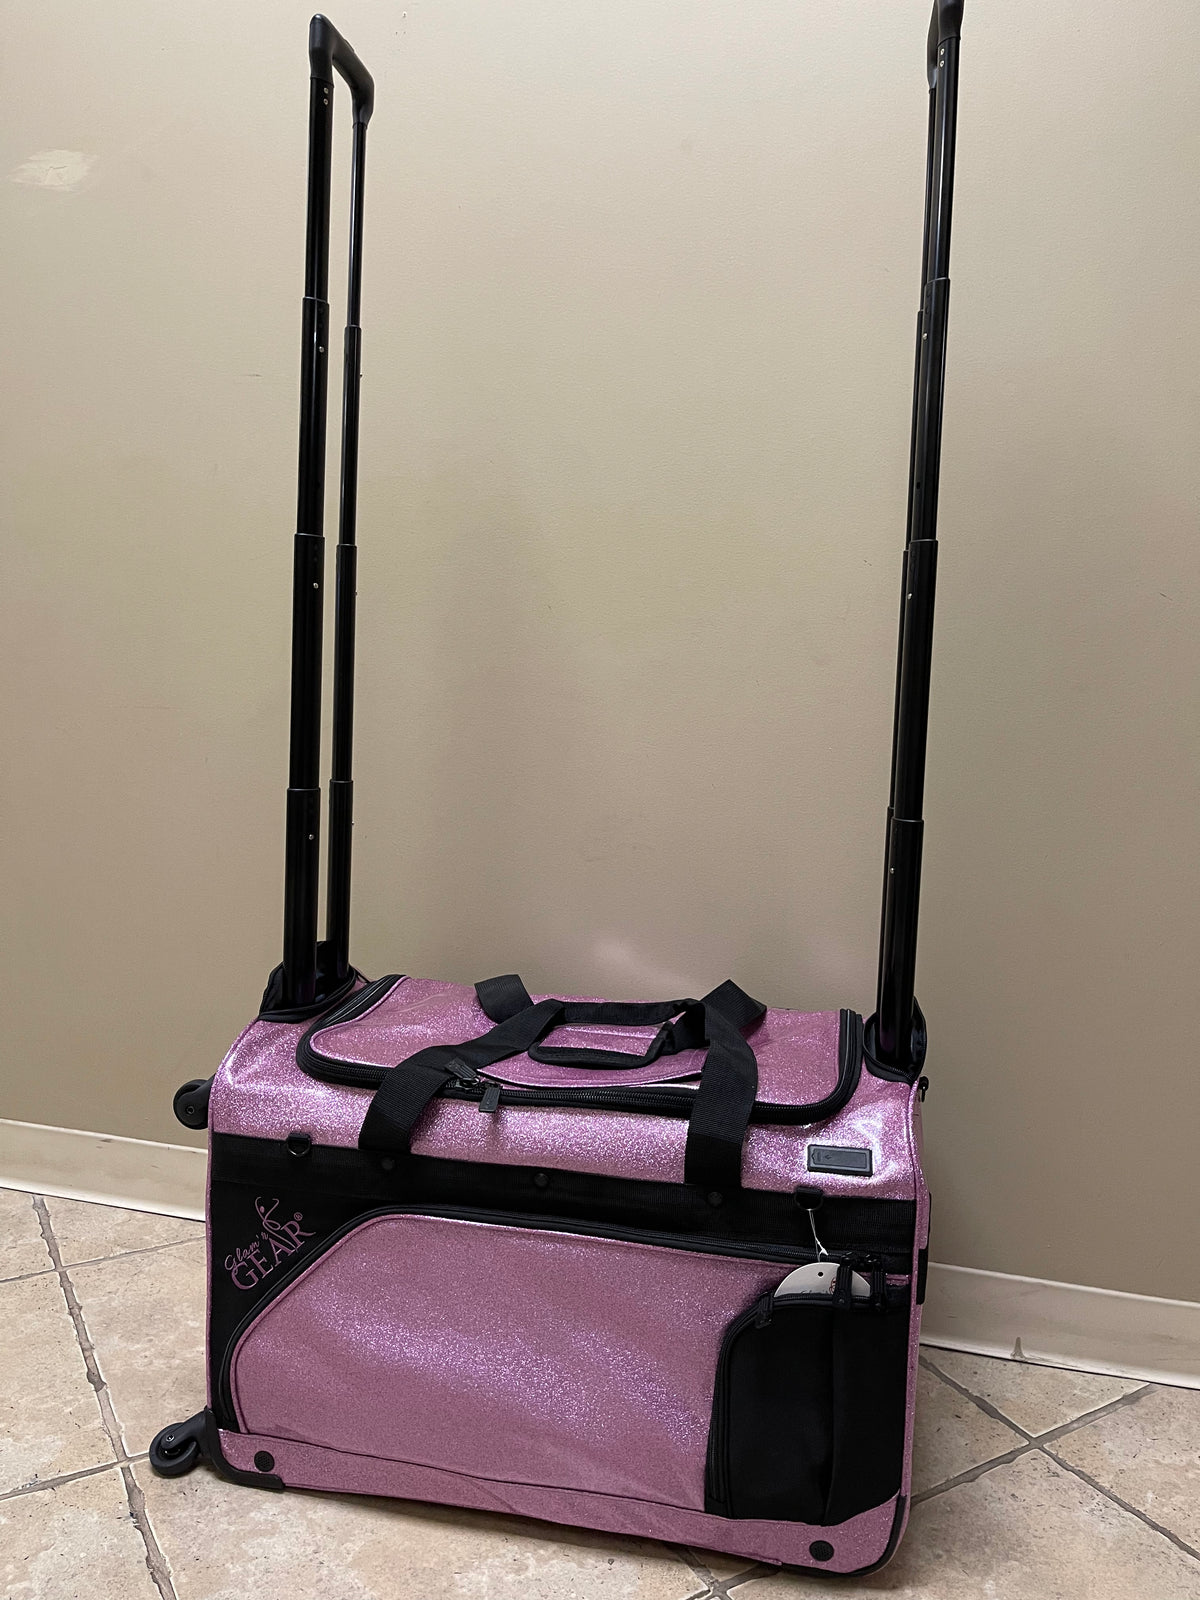 Glam'r Gear Competition Bag Large